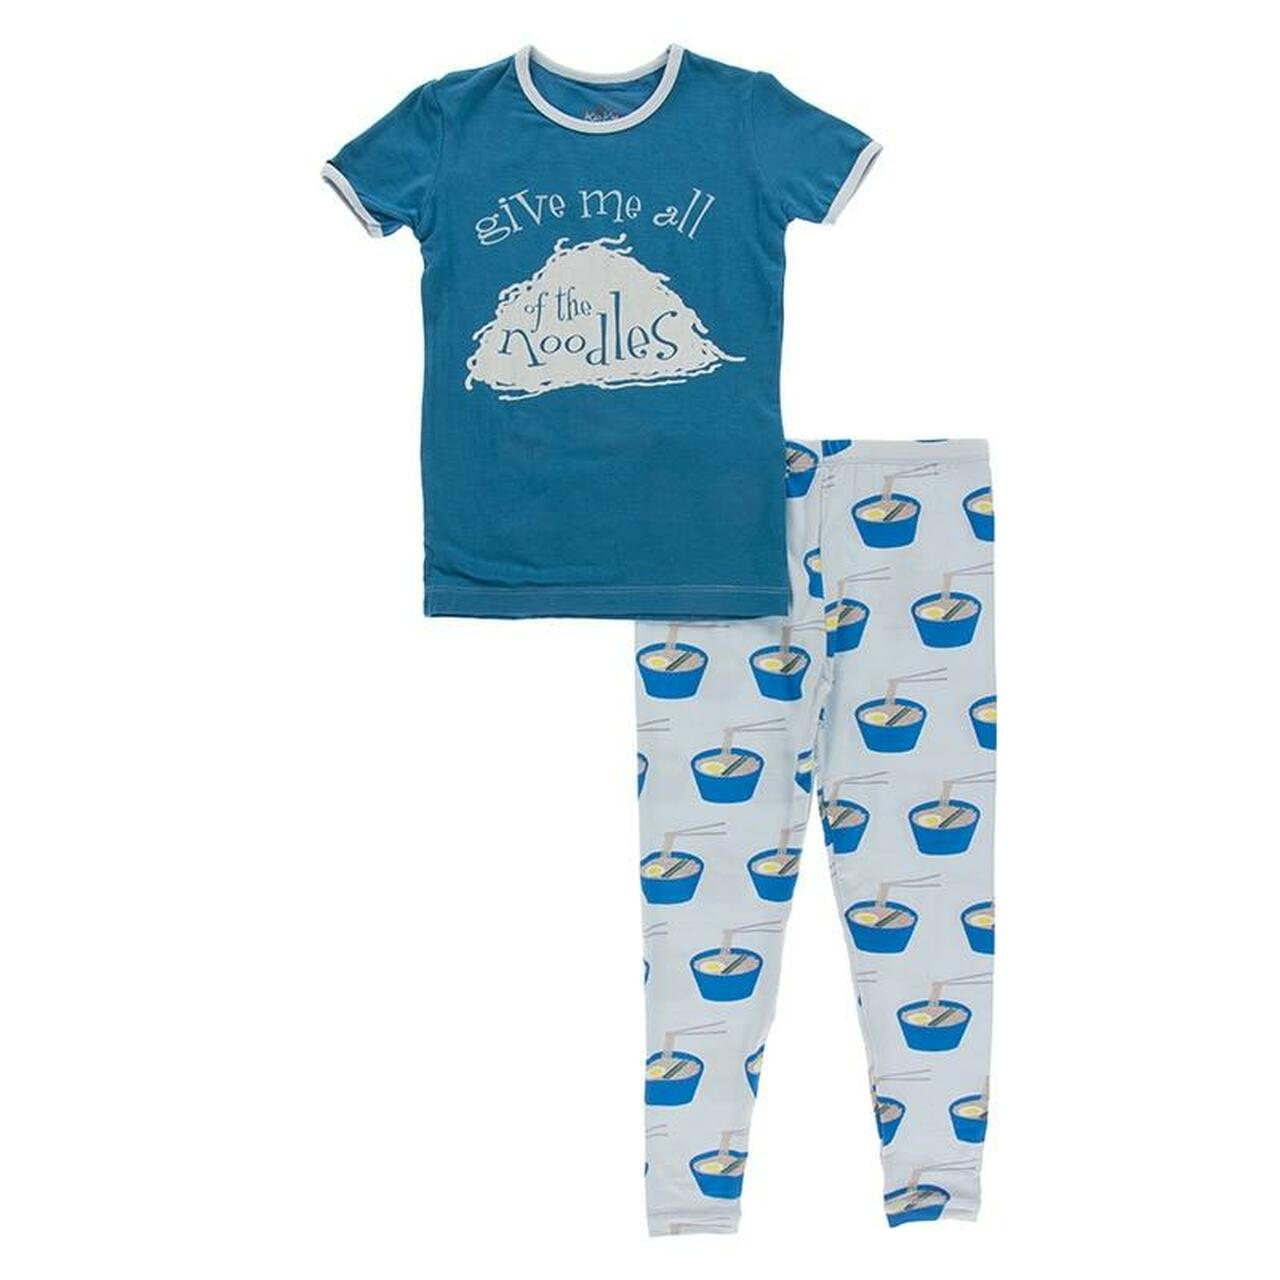  KicKee Pants Solid Long Sleeve Pajama Set, Sport Design, Ultra  Soft and Snug Fitting PJs, Matching Top and Bottom Sleepwear Set, Newborn  to Baby to Kid Pajamas (Cerulean Blue with Deep